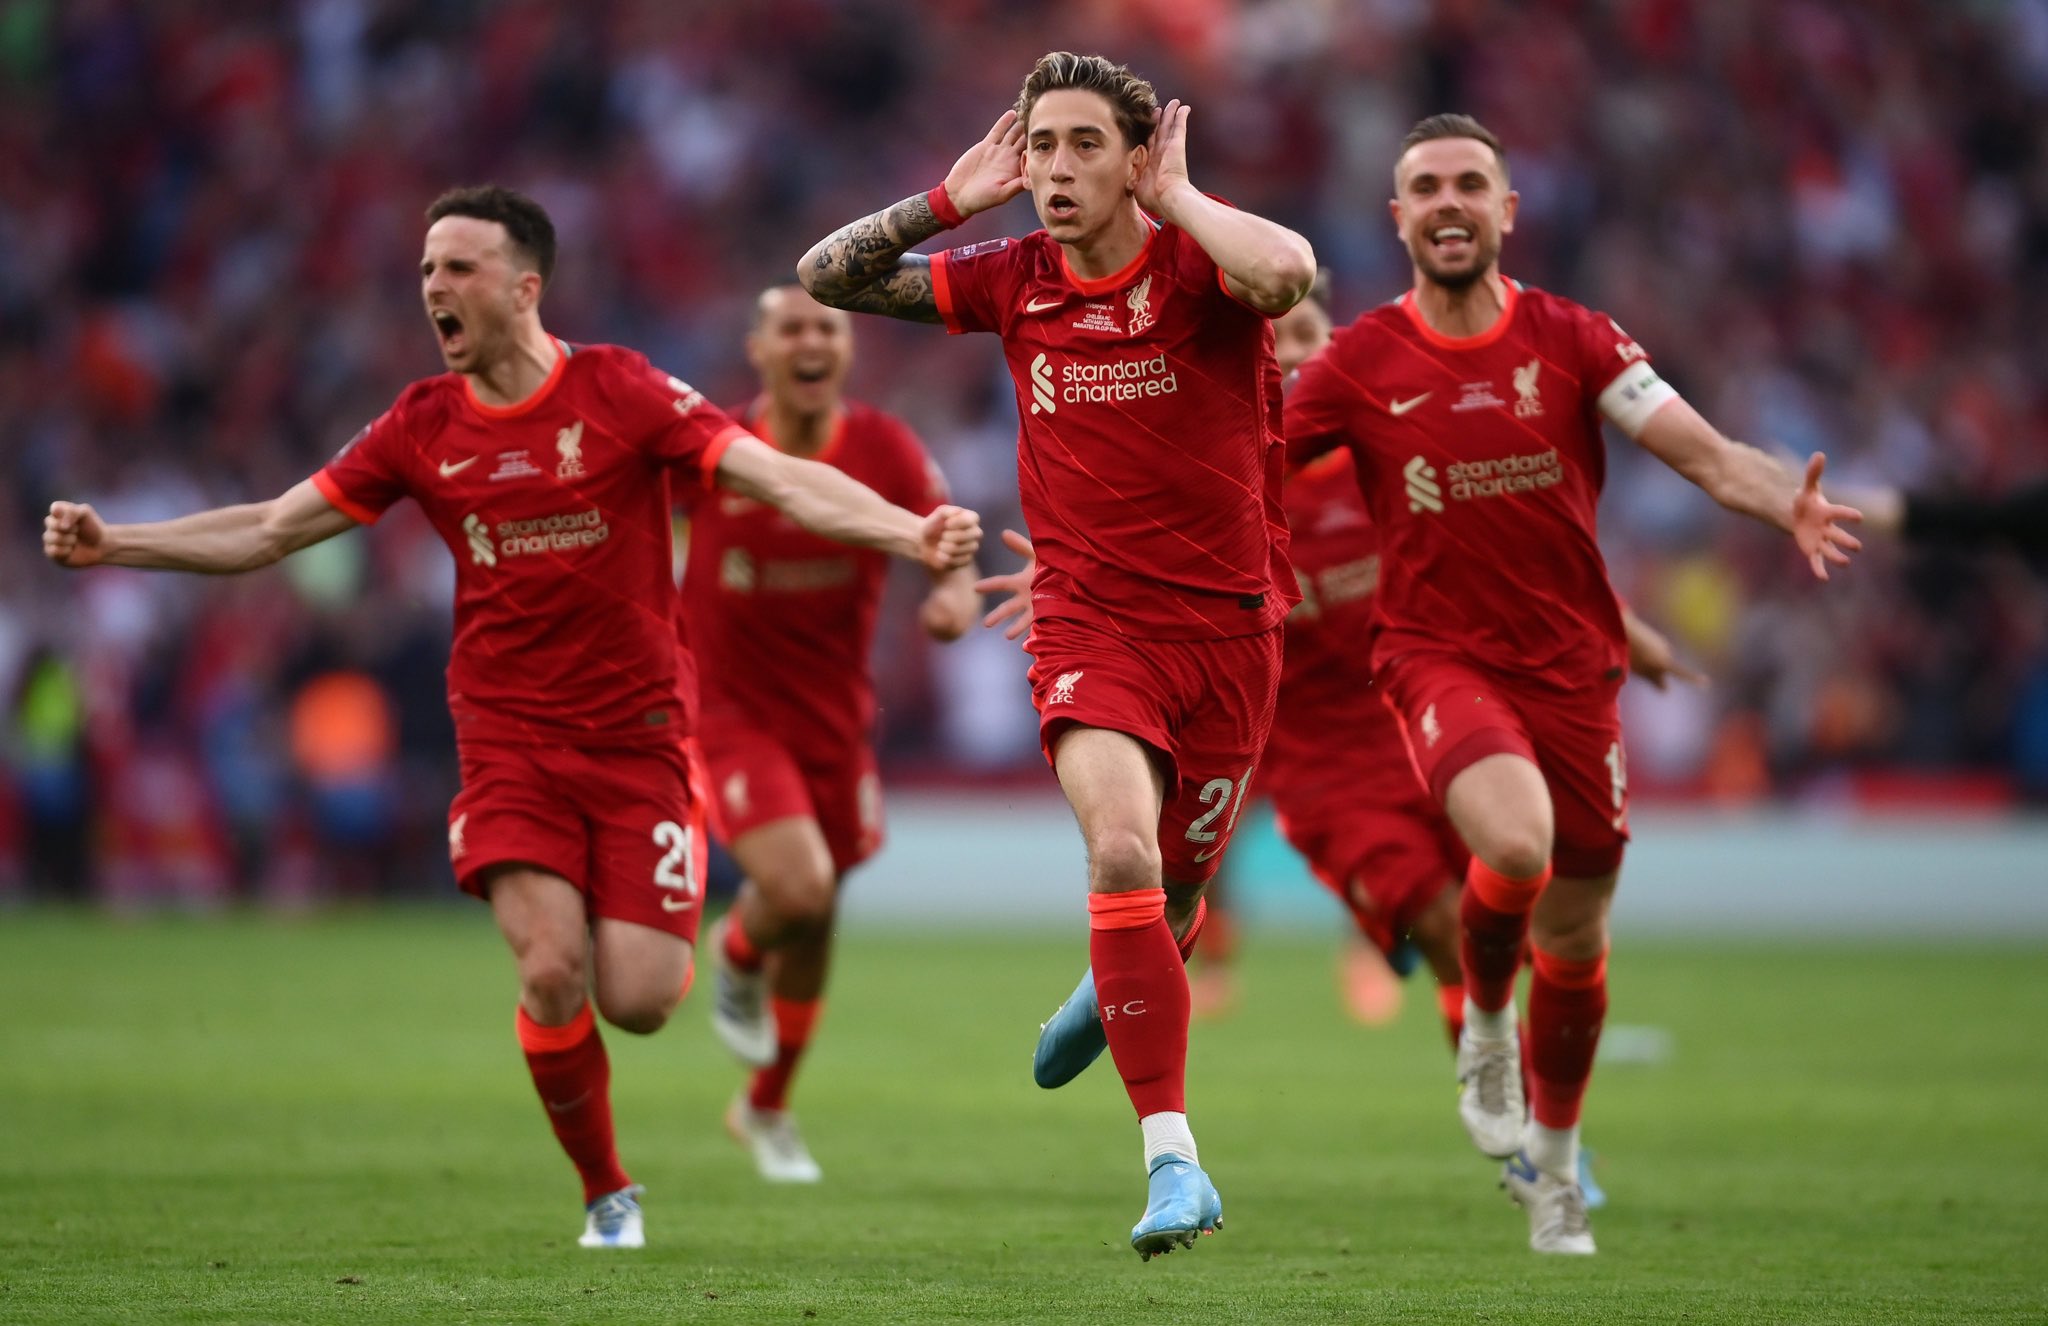 FA Cup Final 2022: LIVERPOOL win the FA Cup to keep QUADRUPLE dream alive, Alisson and Tsimikas star as Liverpool beat Chelsea 6-5 on penalties, Watch HIGHLIGHTS